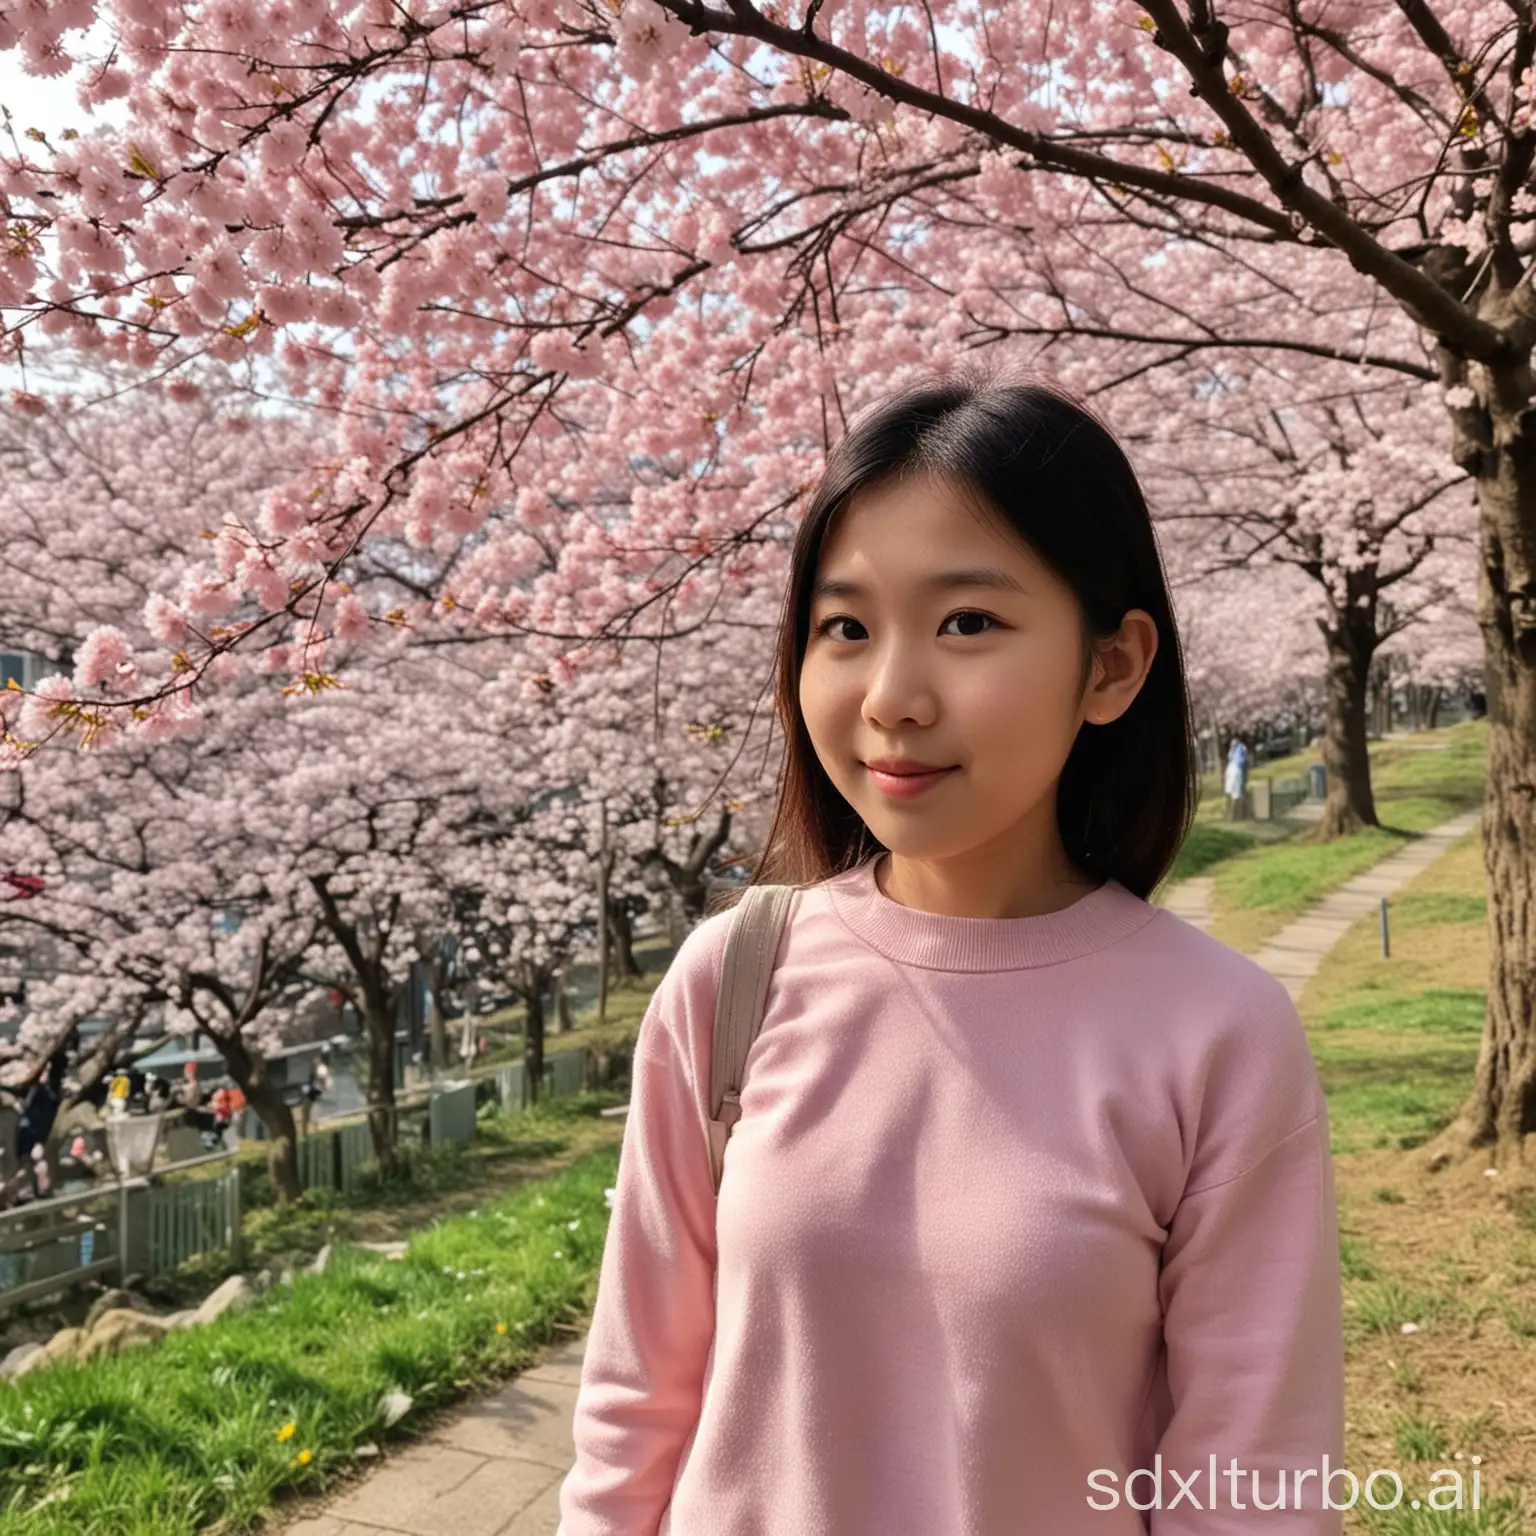 Girl-Surrounded-by-Blooming-Cherry-Blossoms